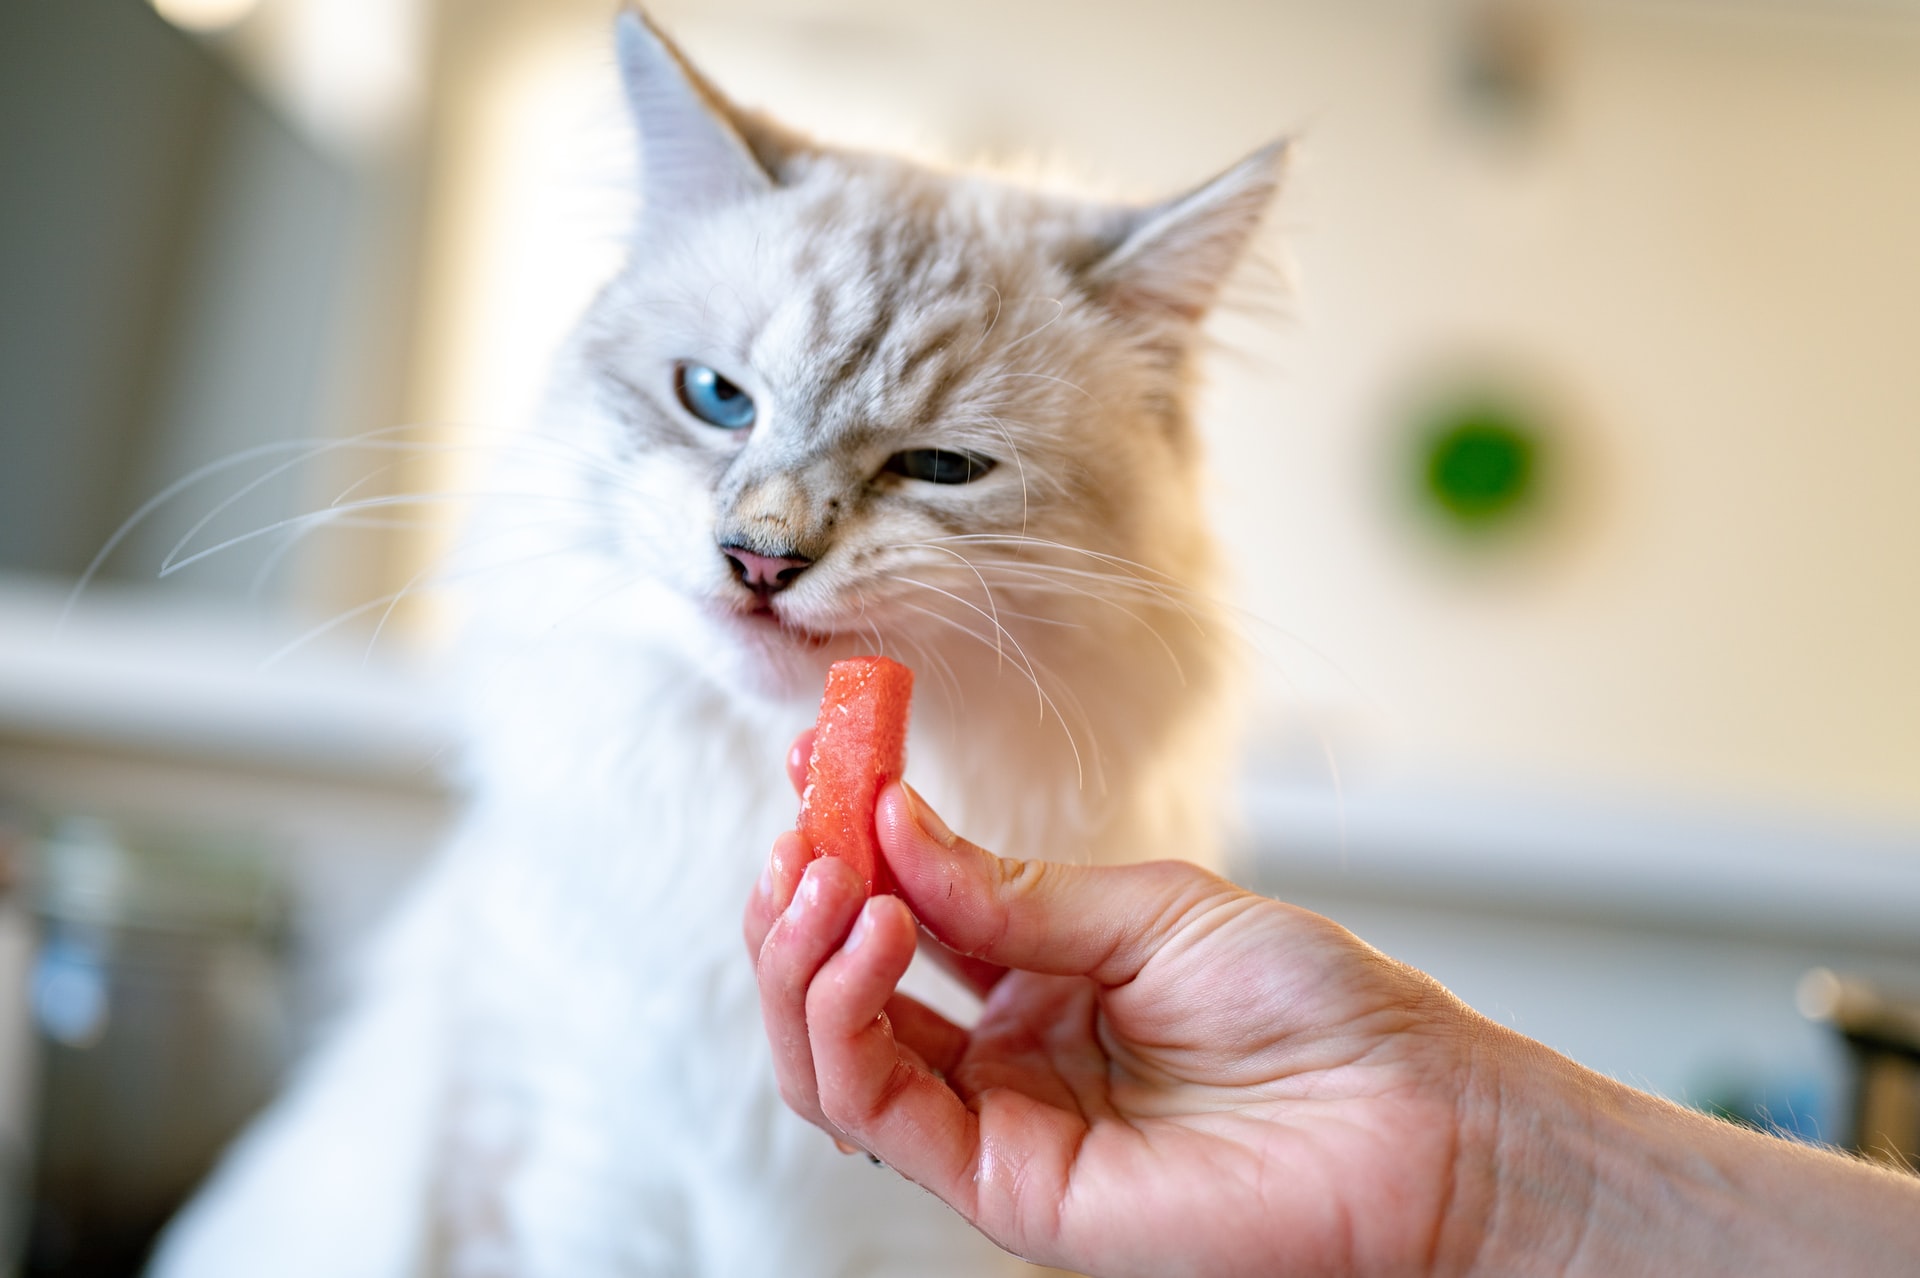 a white cat looking grossed out by a piece of food being offered to them